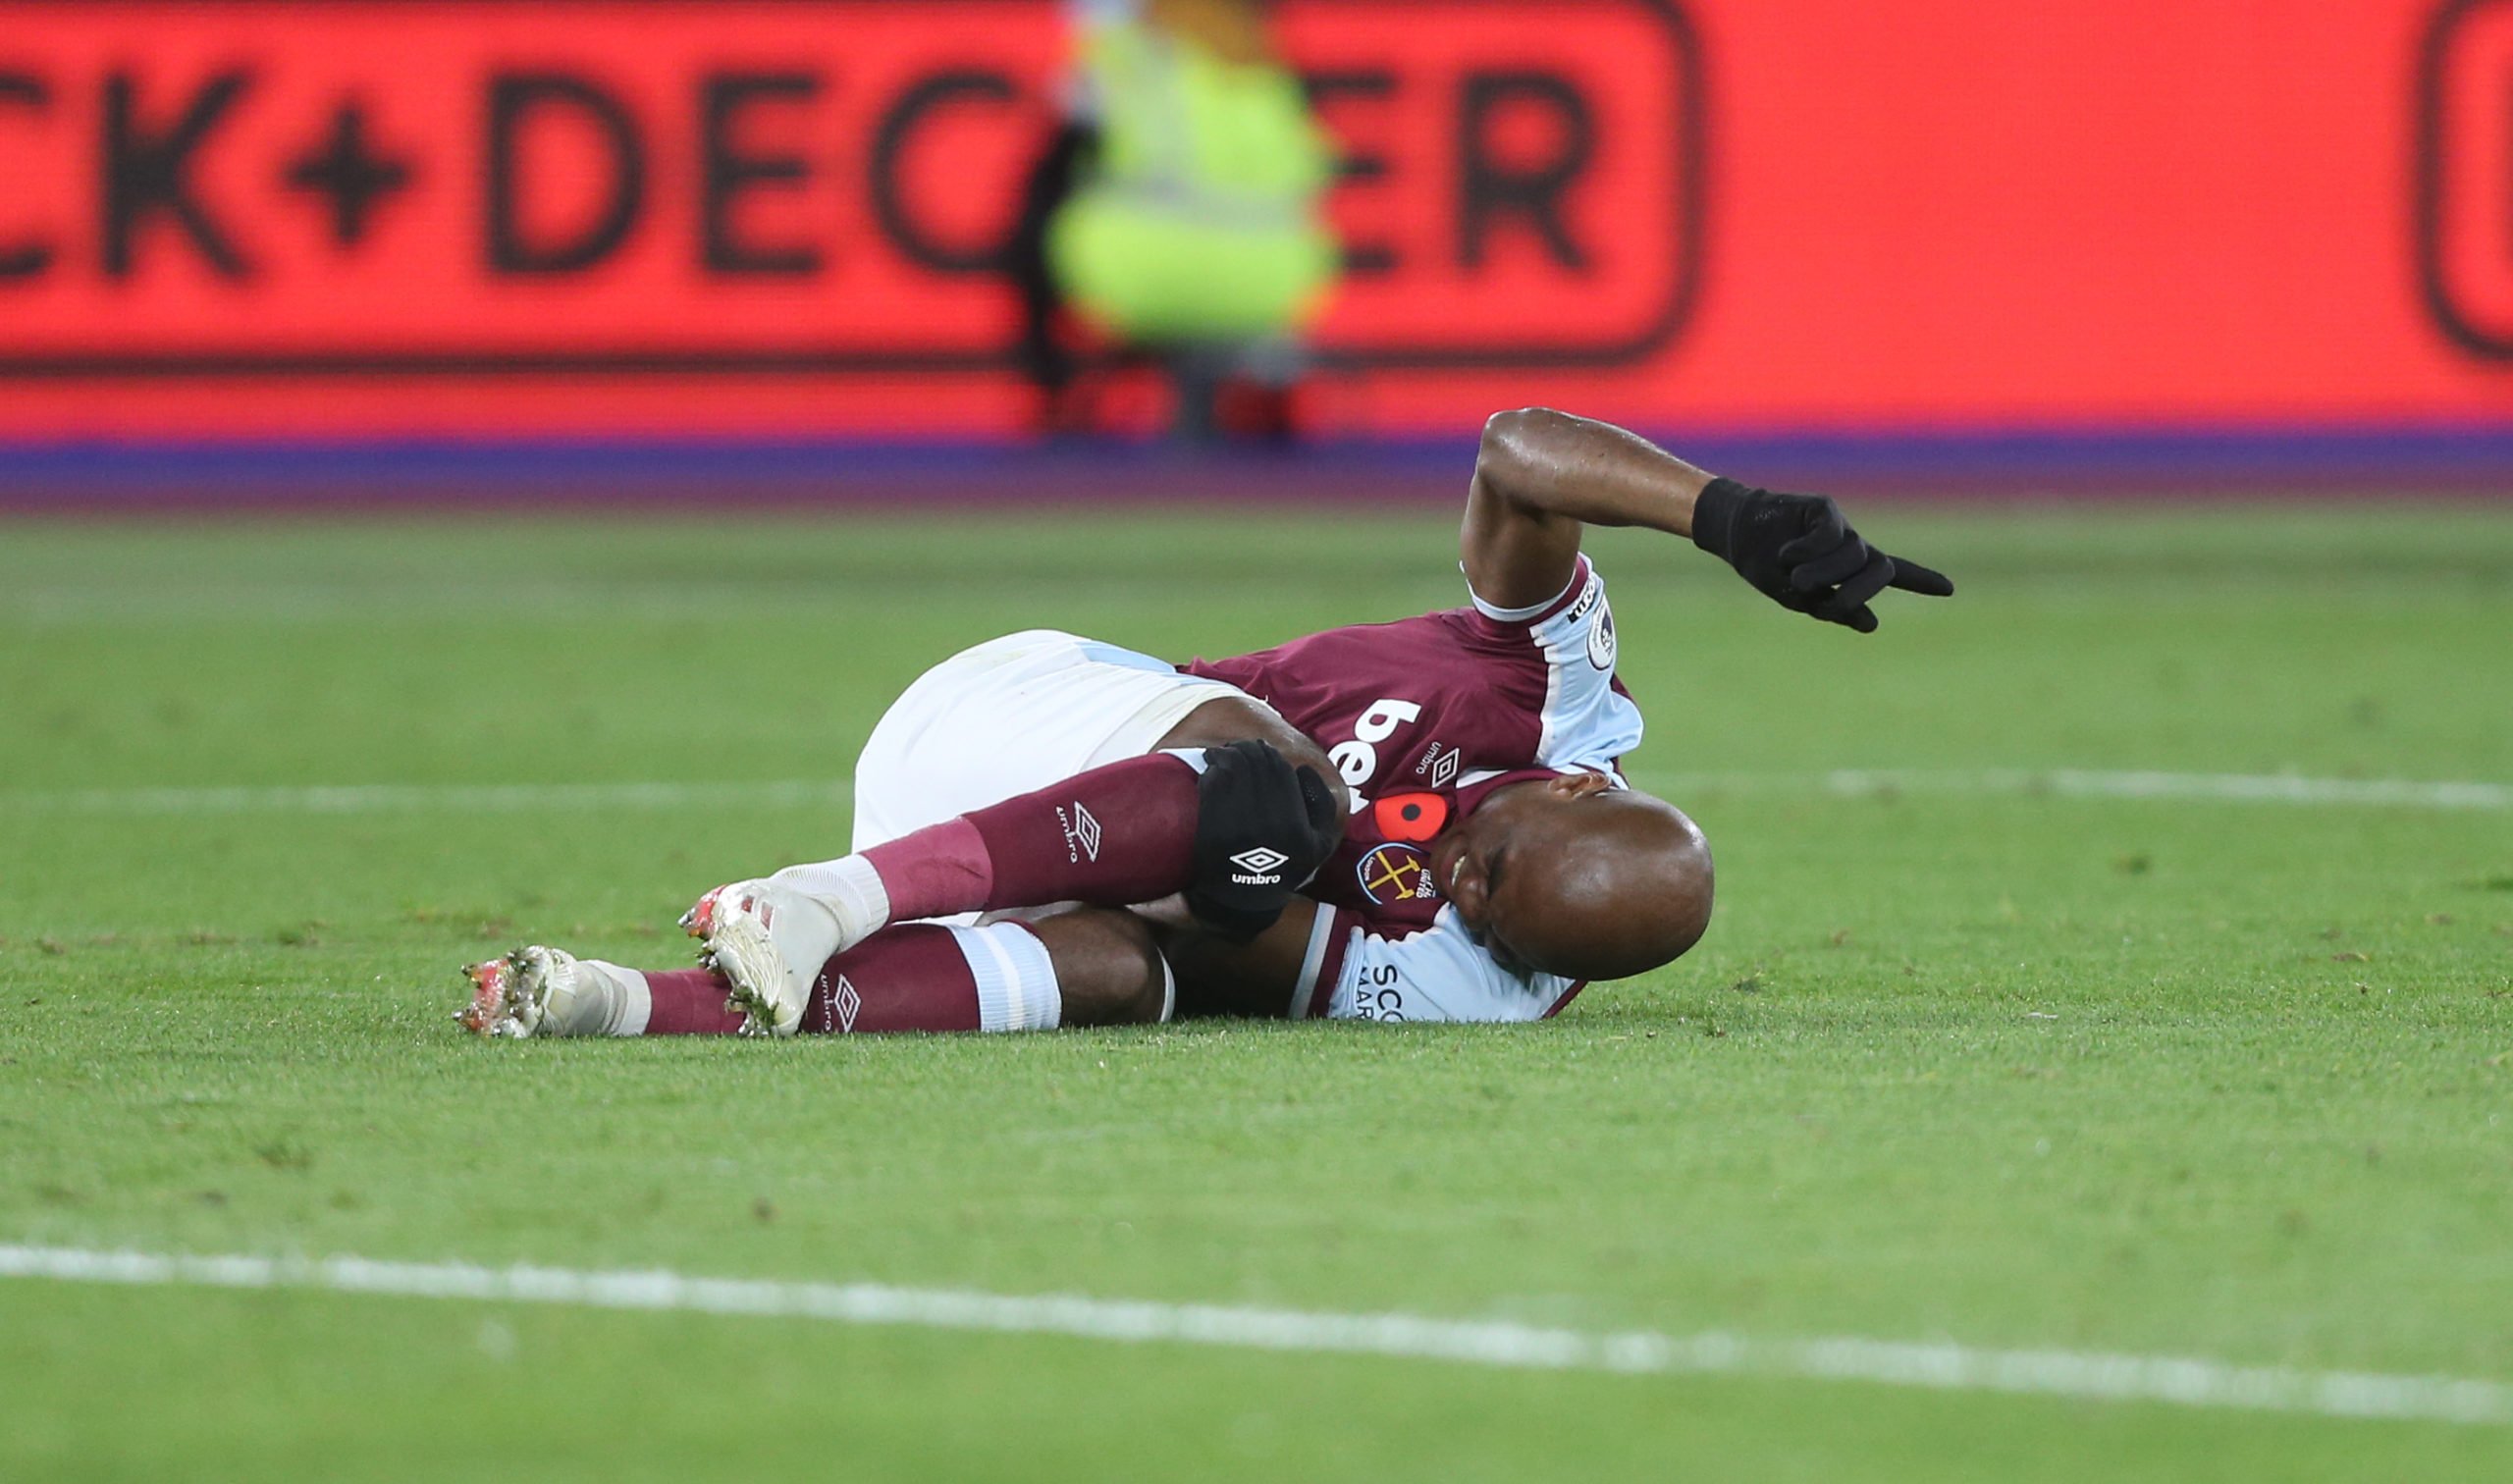 Report: West Ham ace Angelo Ogbonna could be gone in the summer